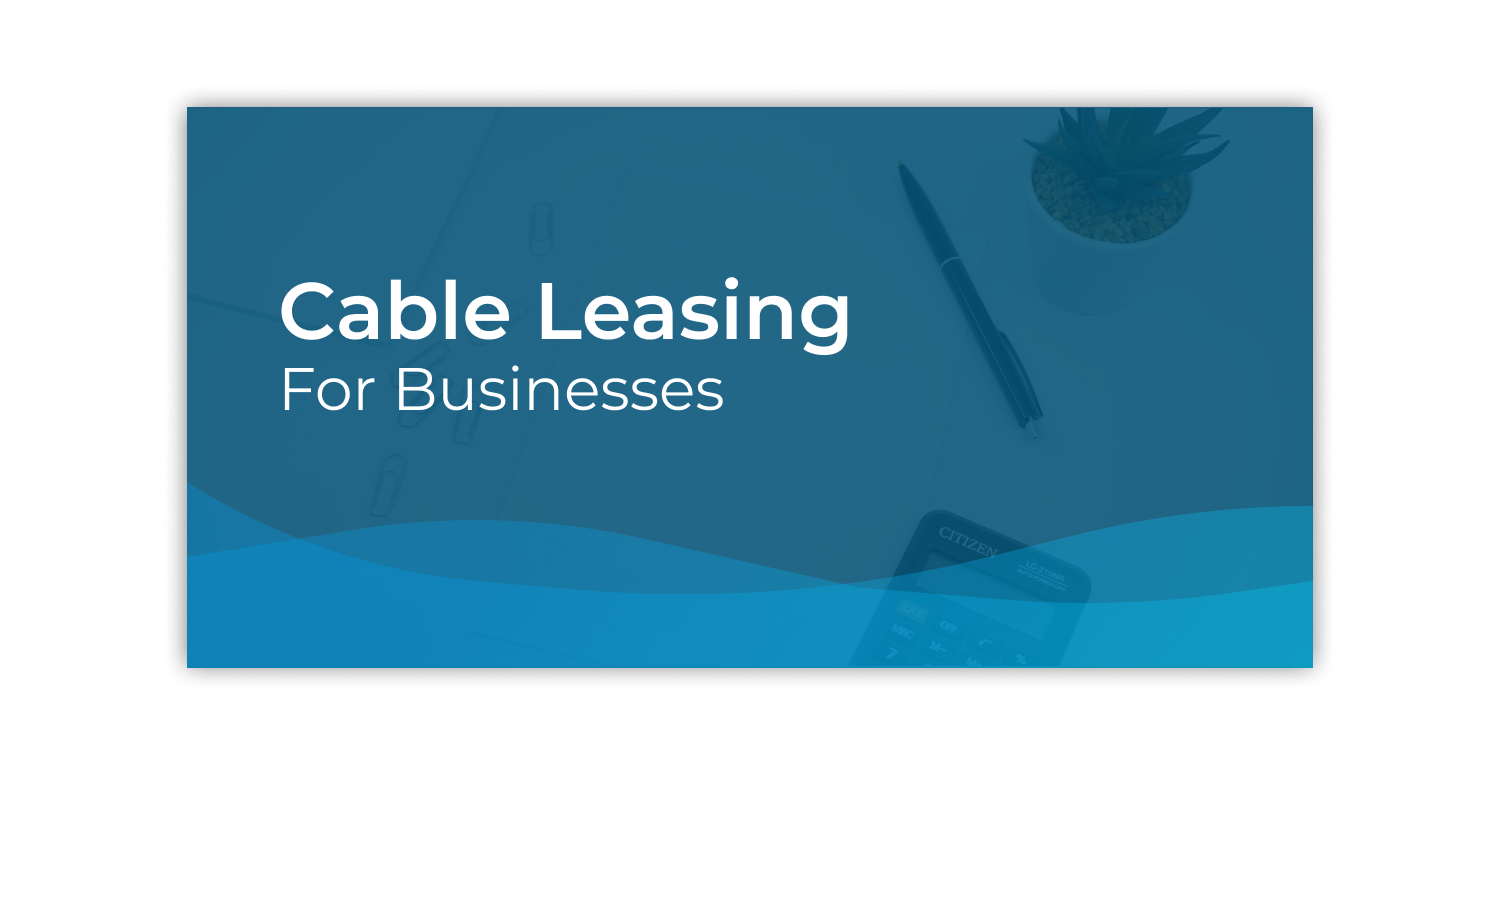 Asset finance for business cable leasing